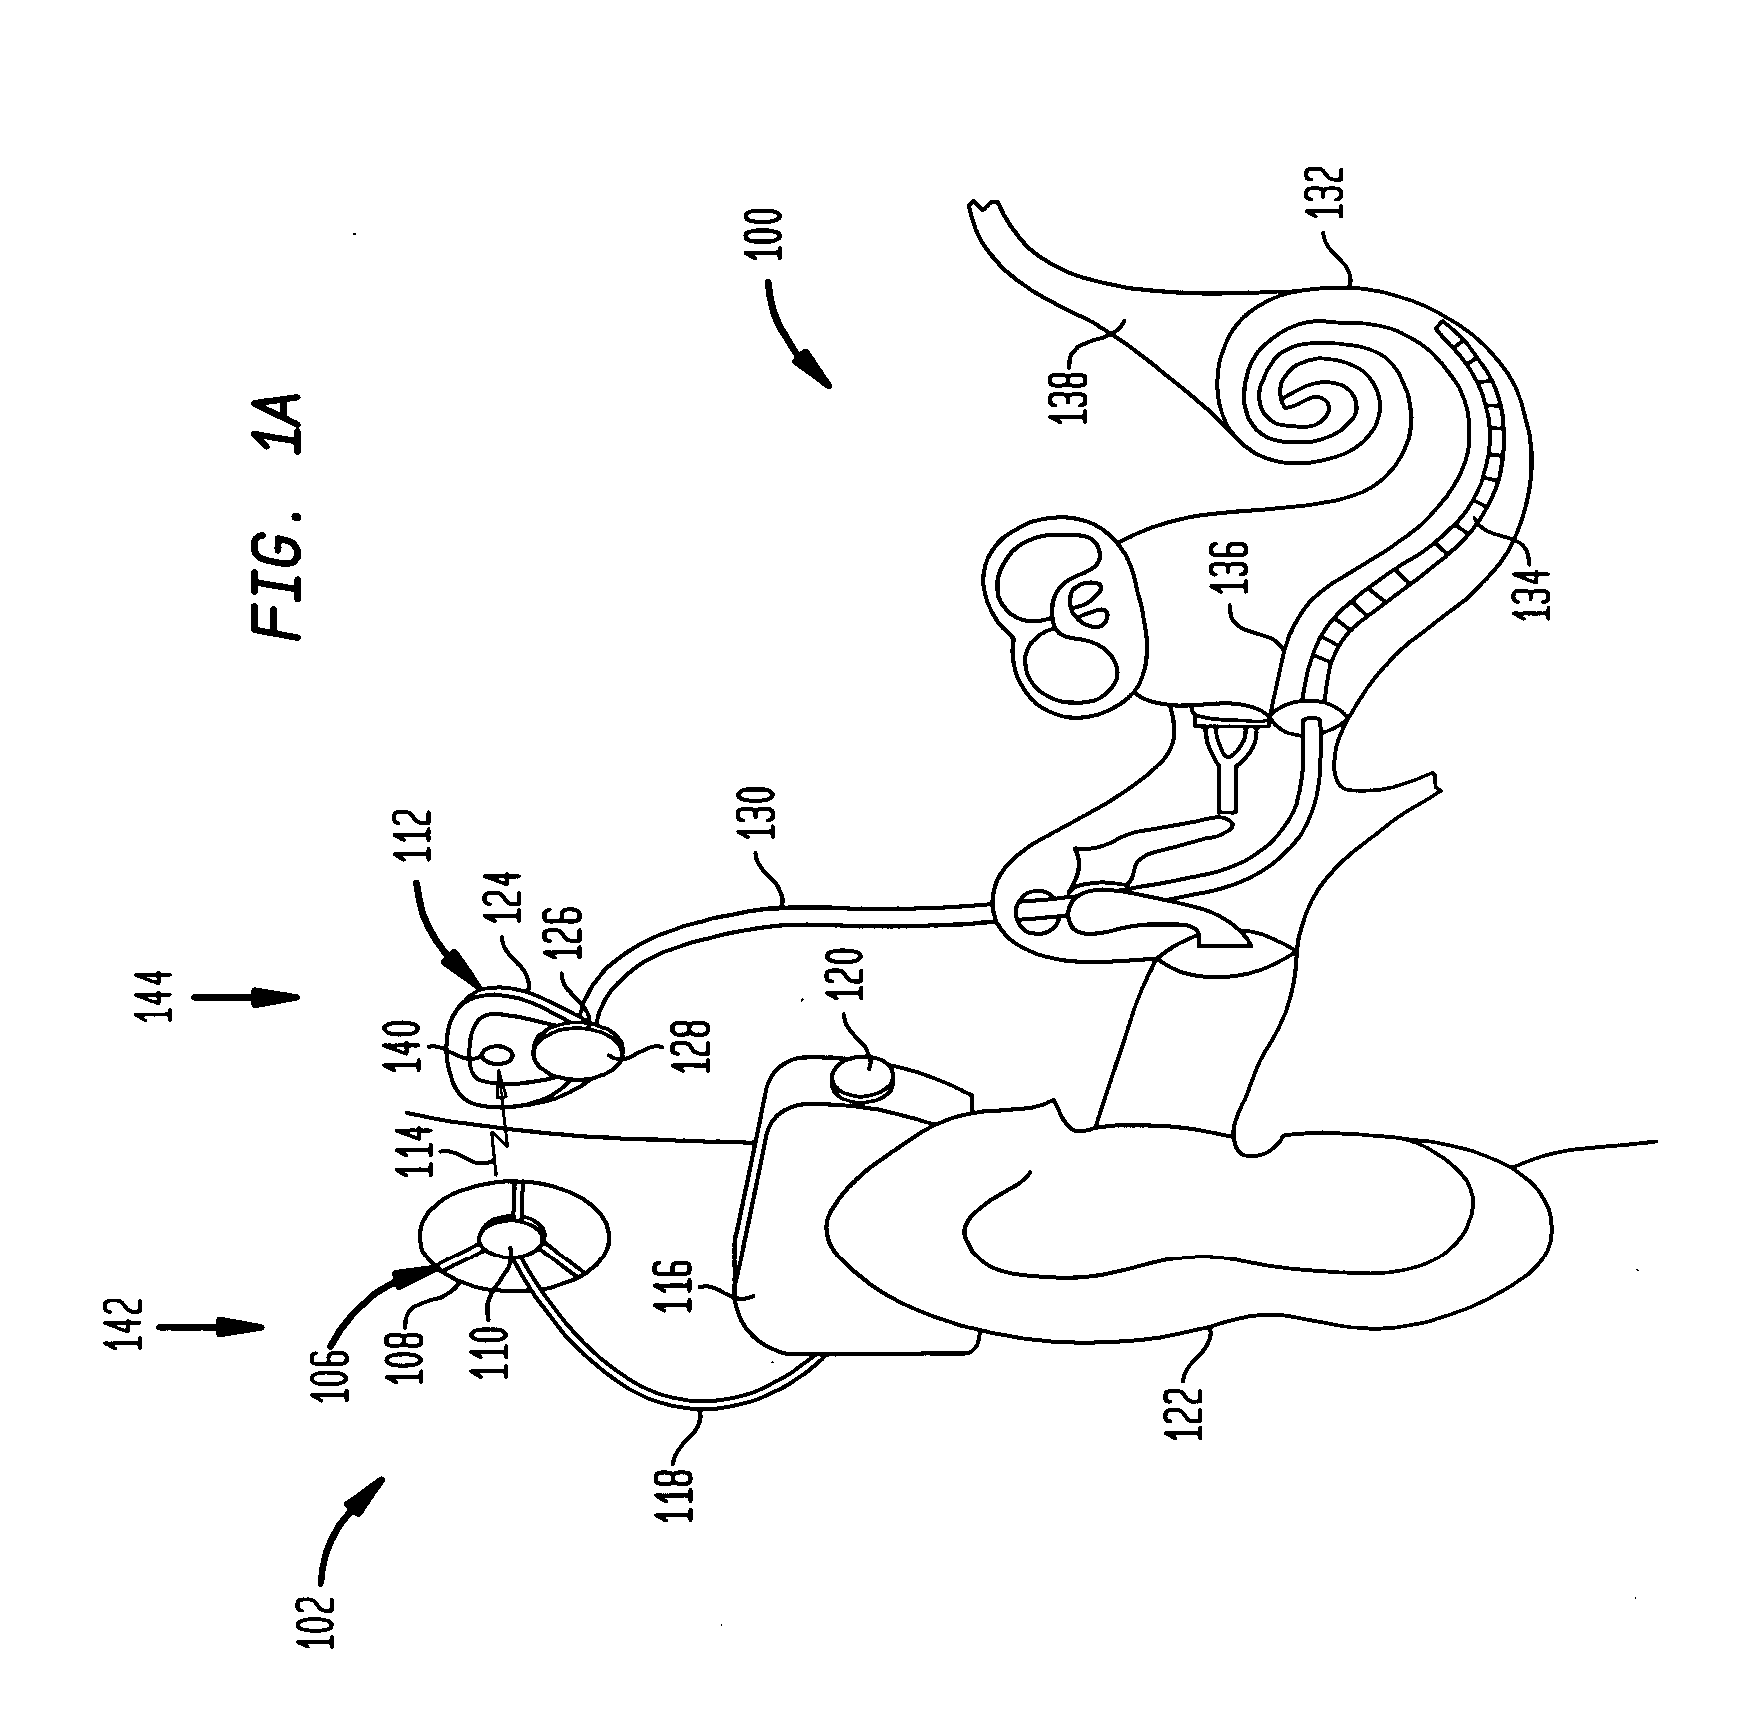 Medical device with magnetically-responsive control switch